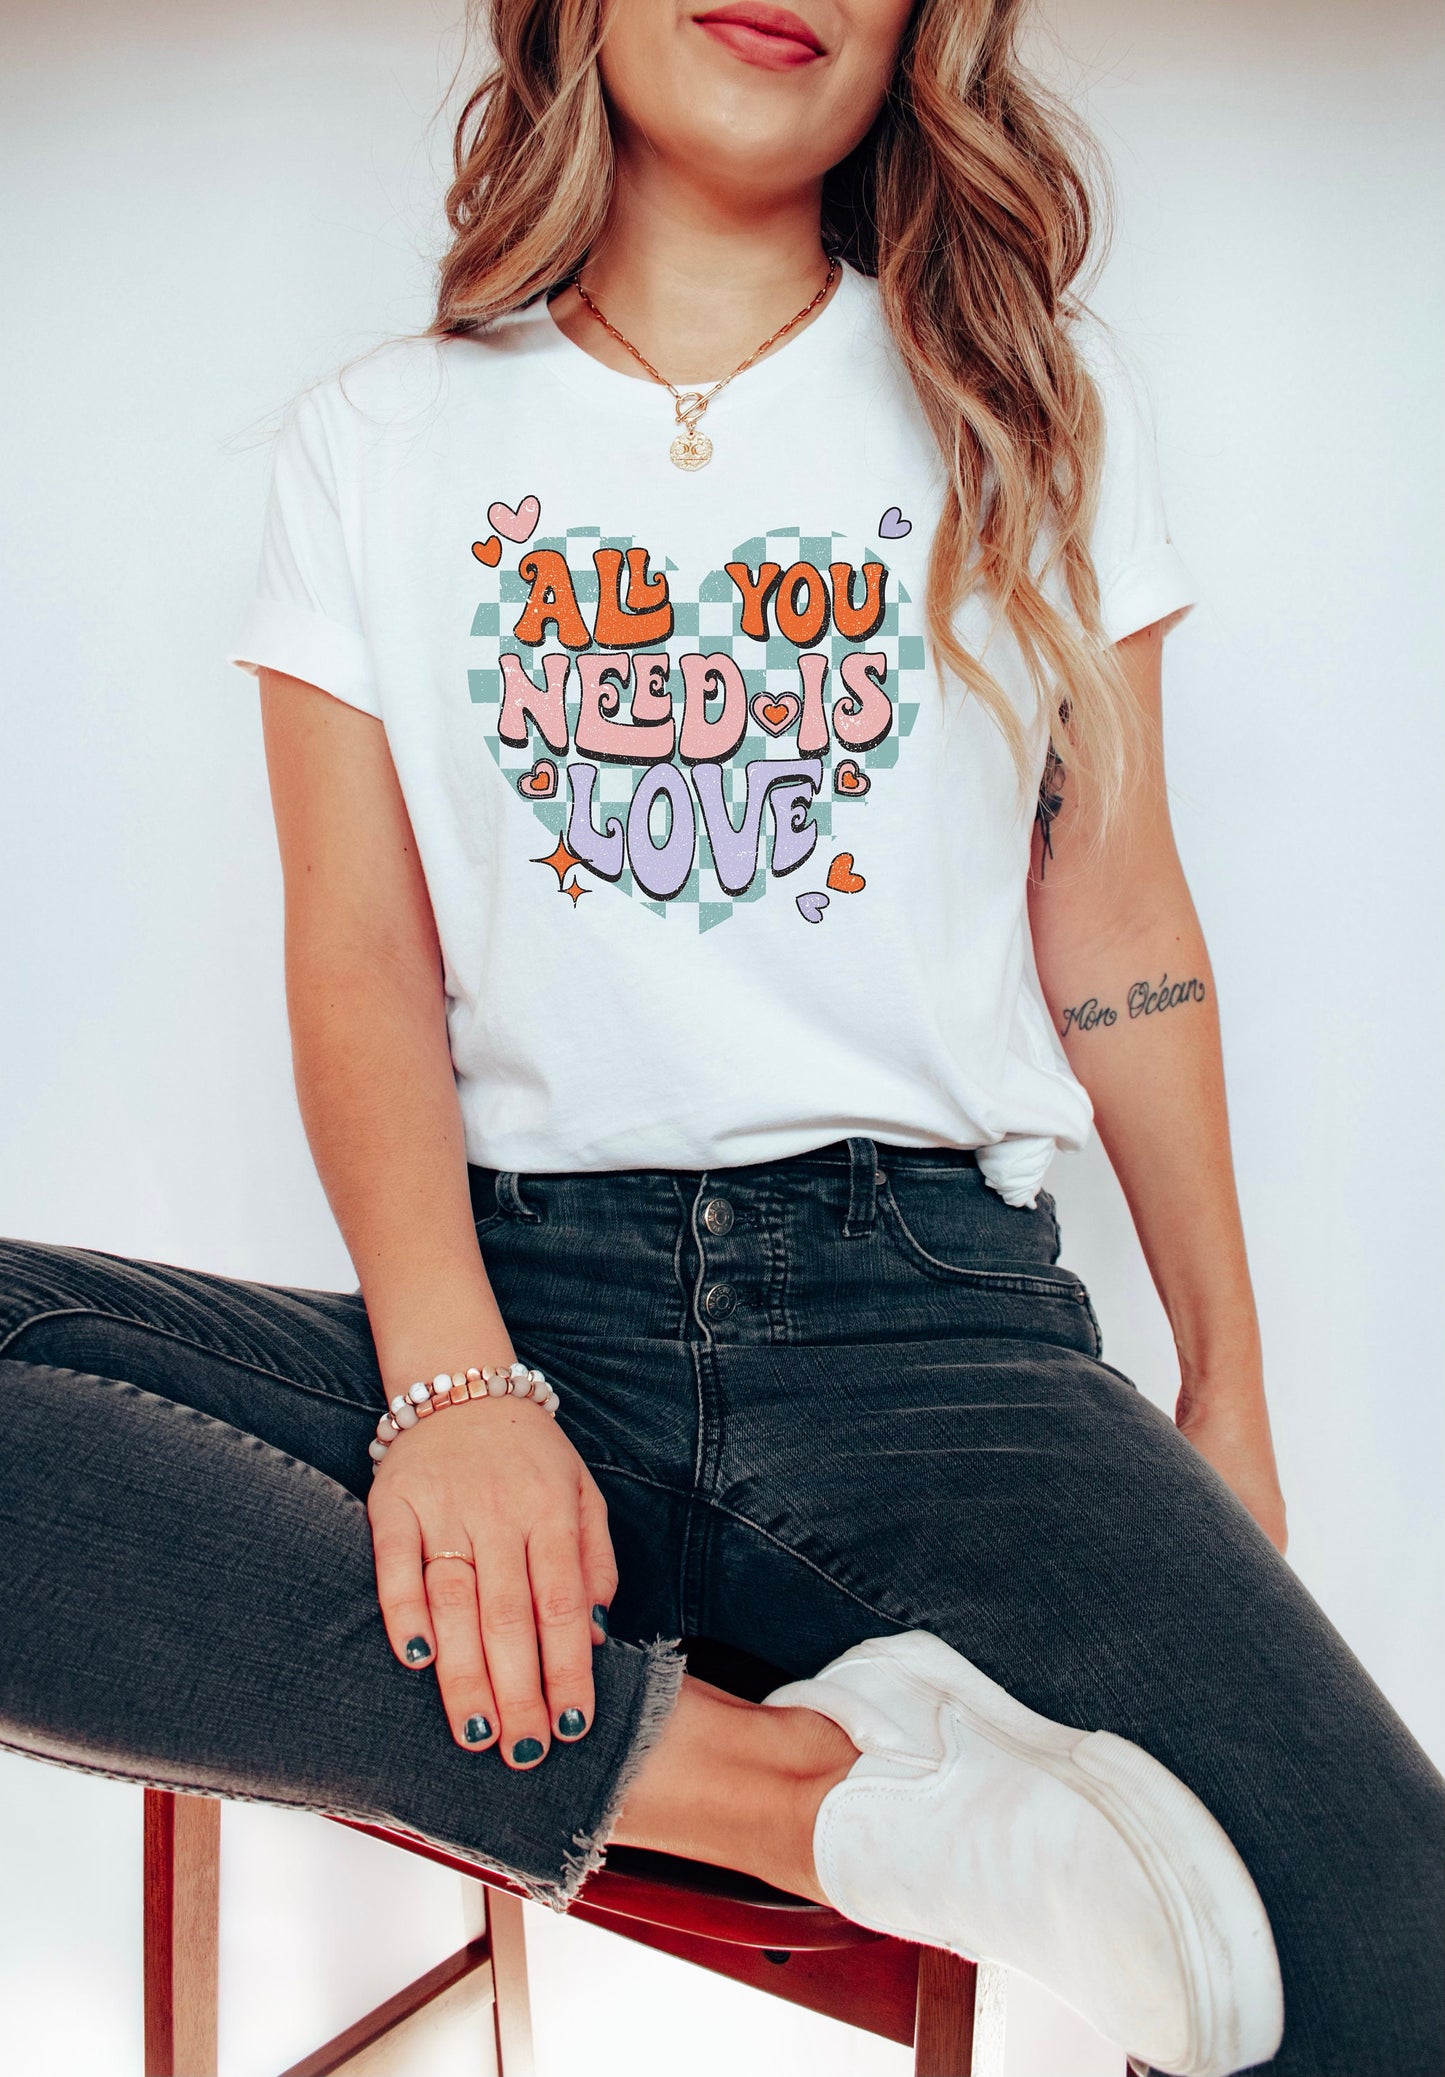 All you need is love Shirt, Valentines day shirt, Love birds, For Women, Be Mine, Heart Shirt, Retro Valentines Day Shirt, XOXO Shirt, Love